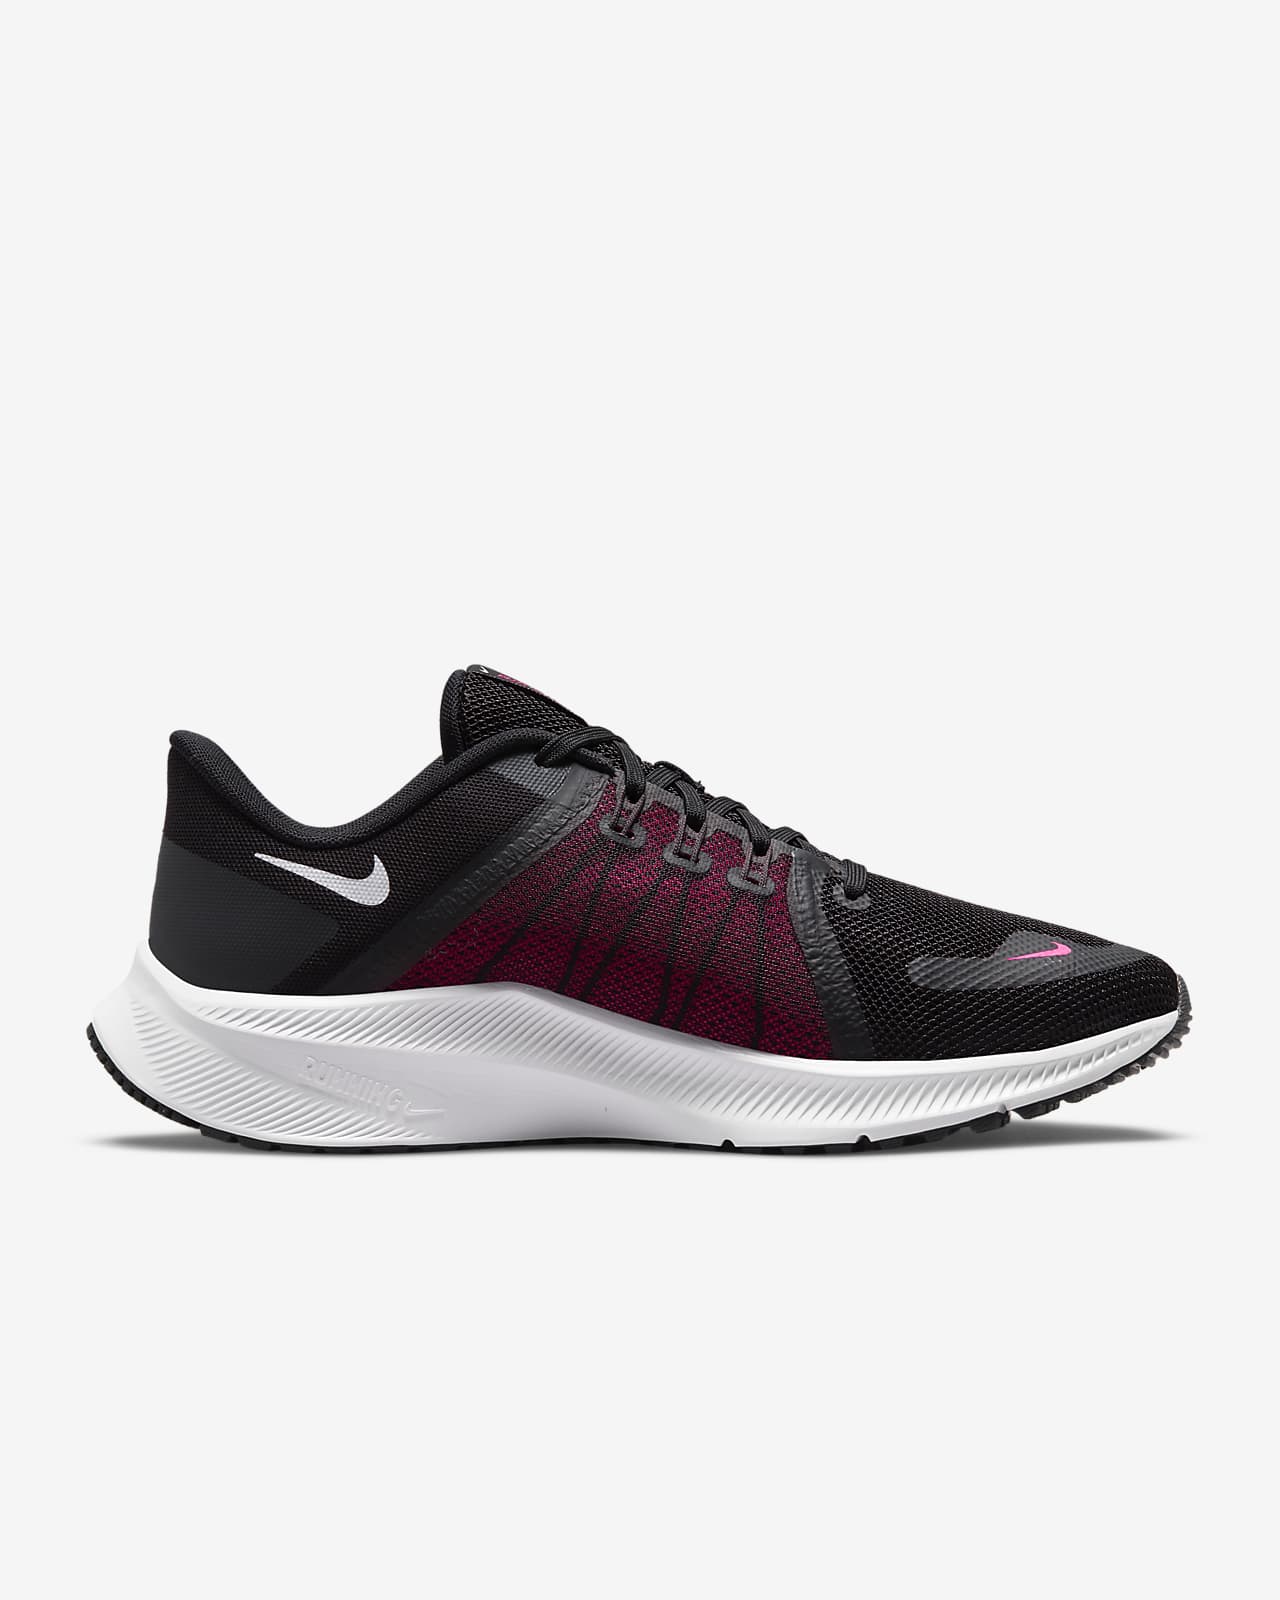 nike quest 4 women's road running shoes